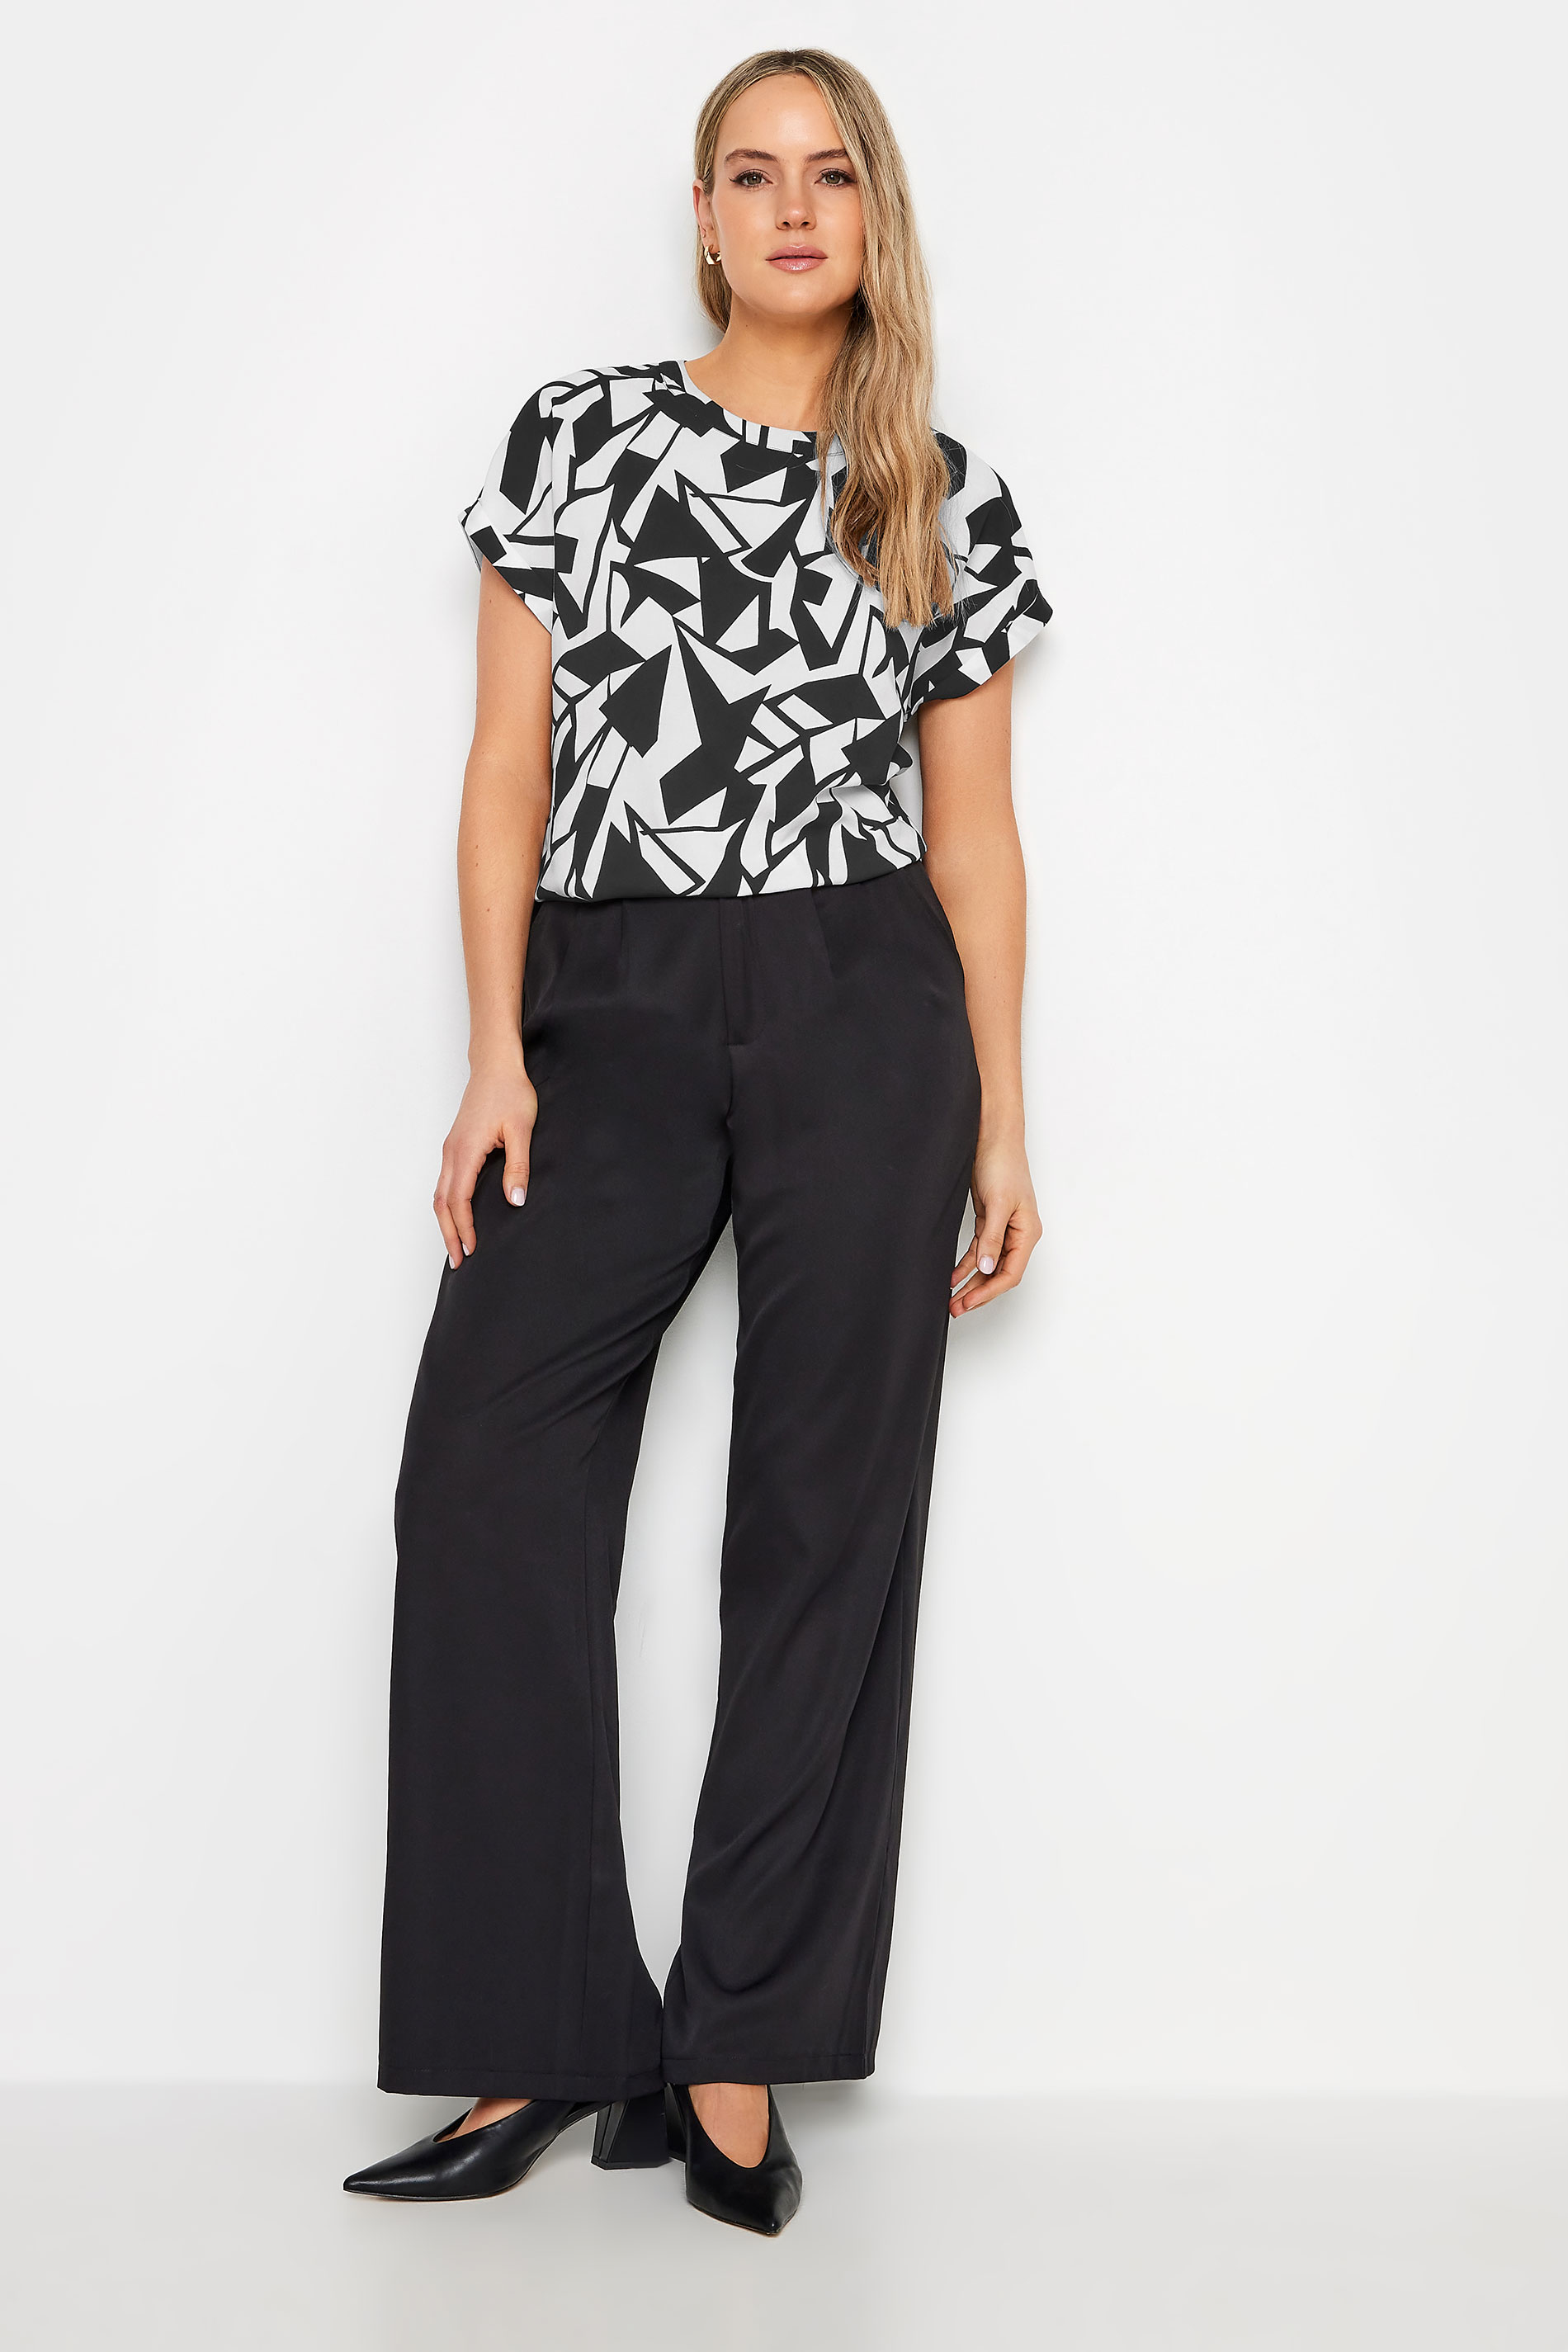 LTS Tall Black & White Abstract Print Short Sleeve Blouse